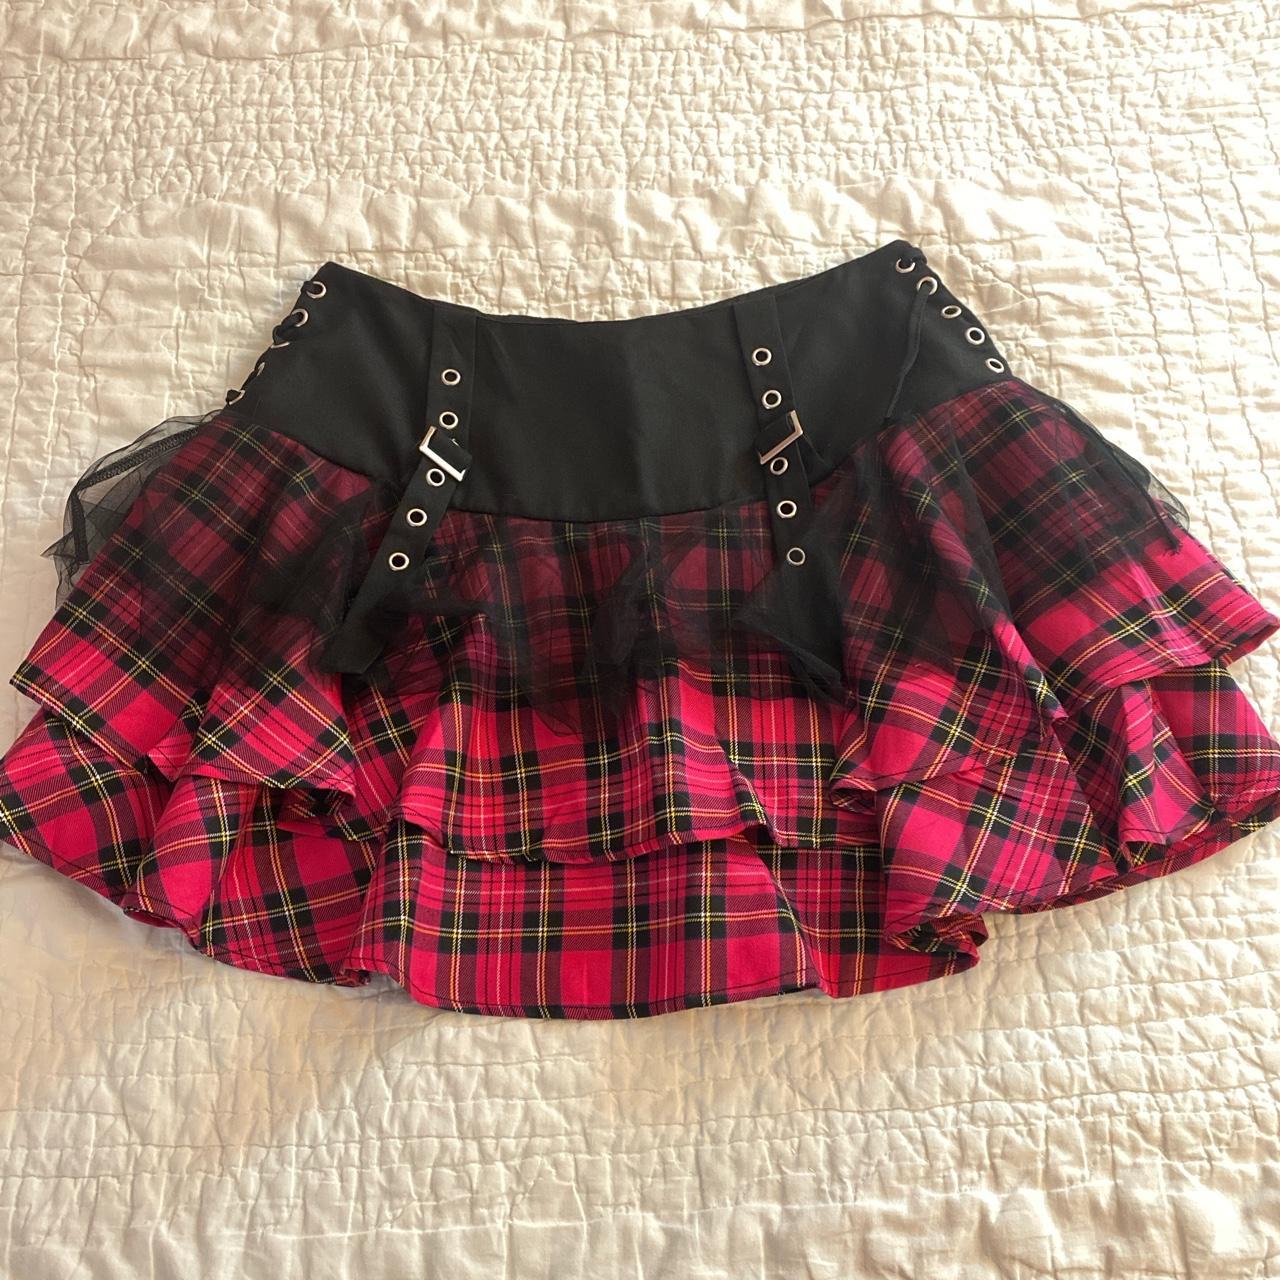 pink and black grommet skirt from hot topic ♡ \\... - Depop